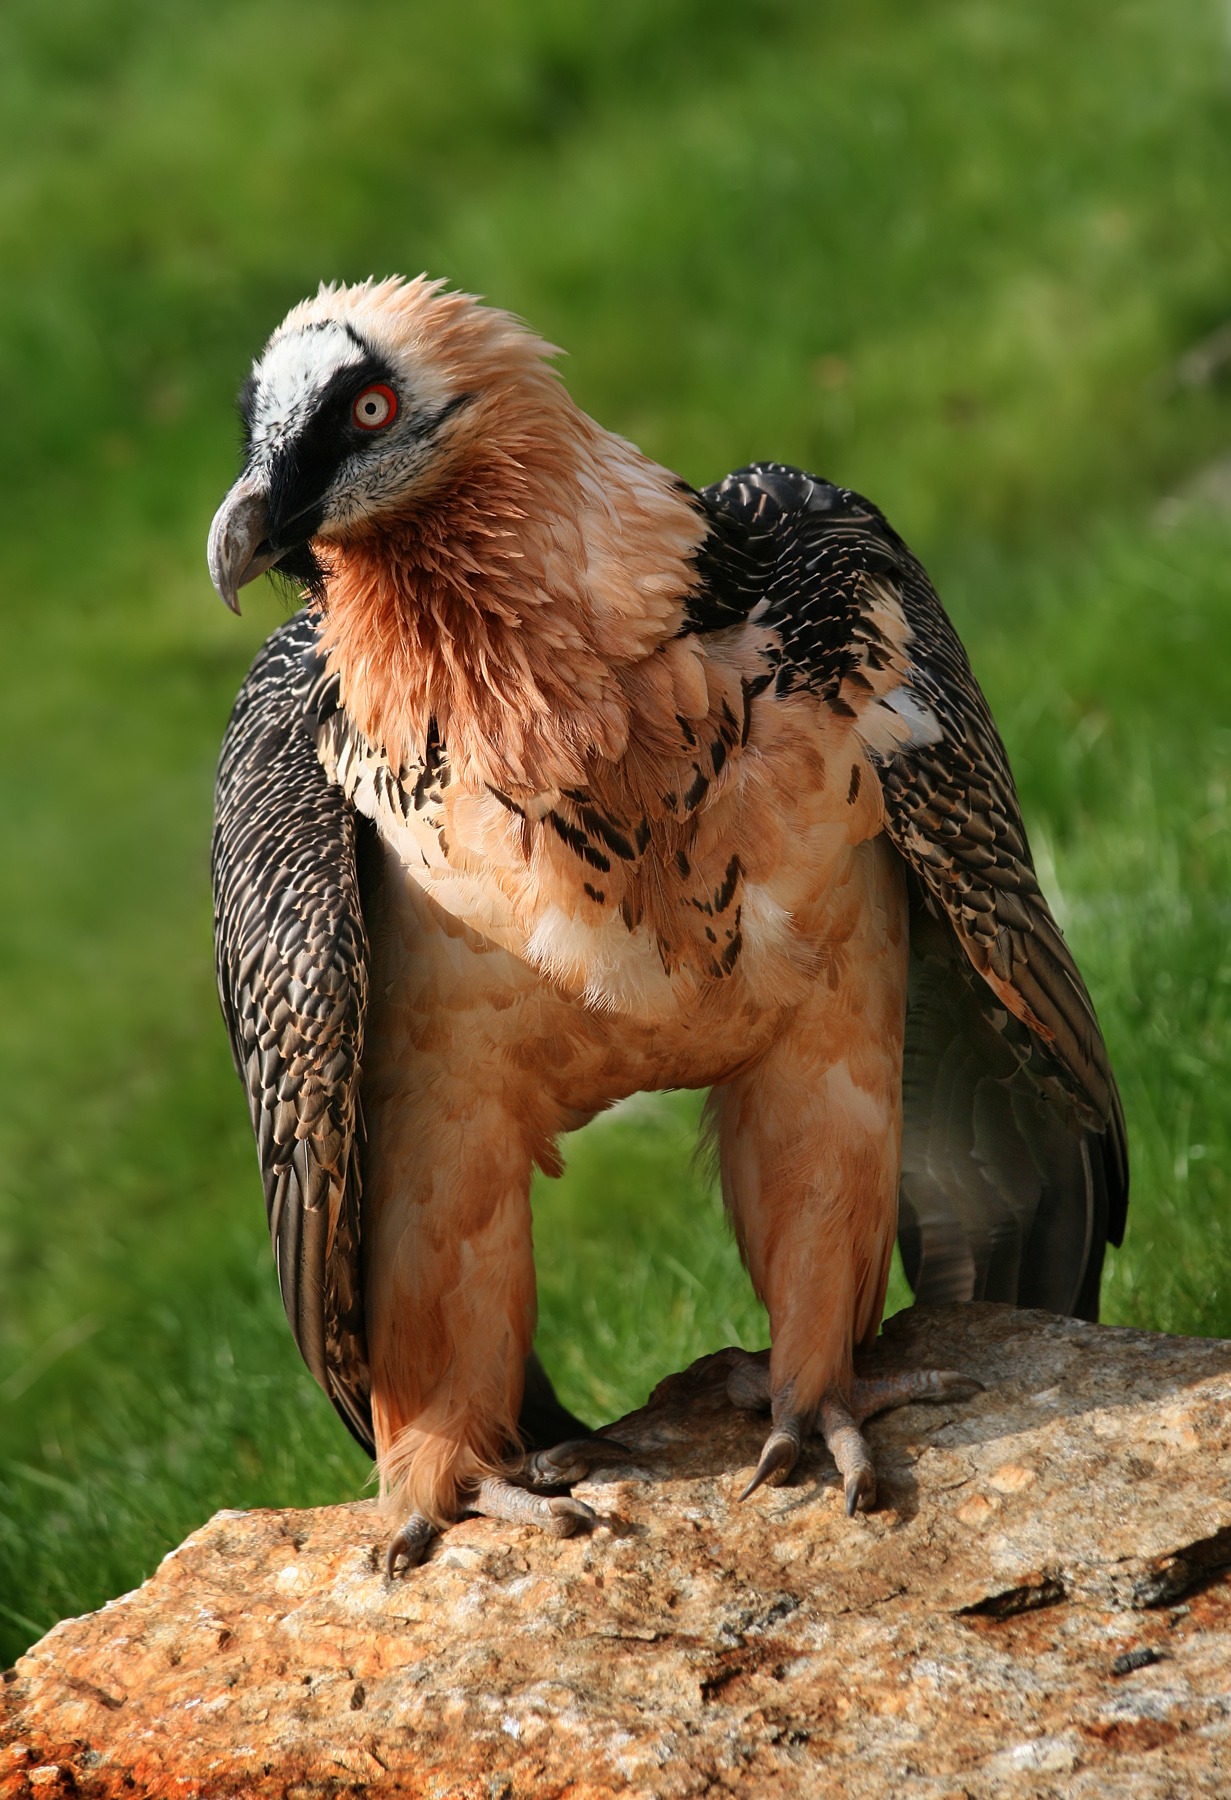 Which bird of prey is also called bearded vulture?